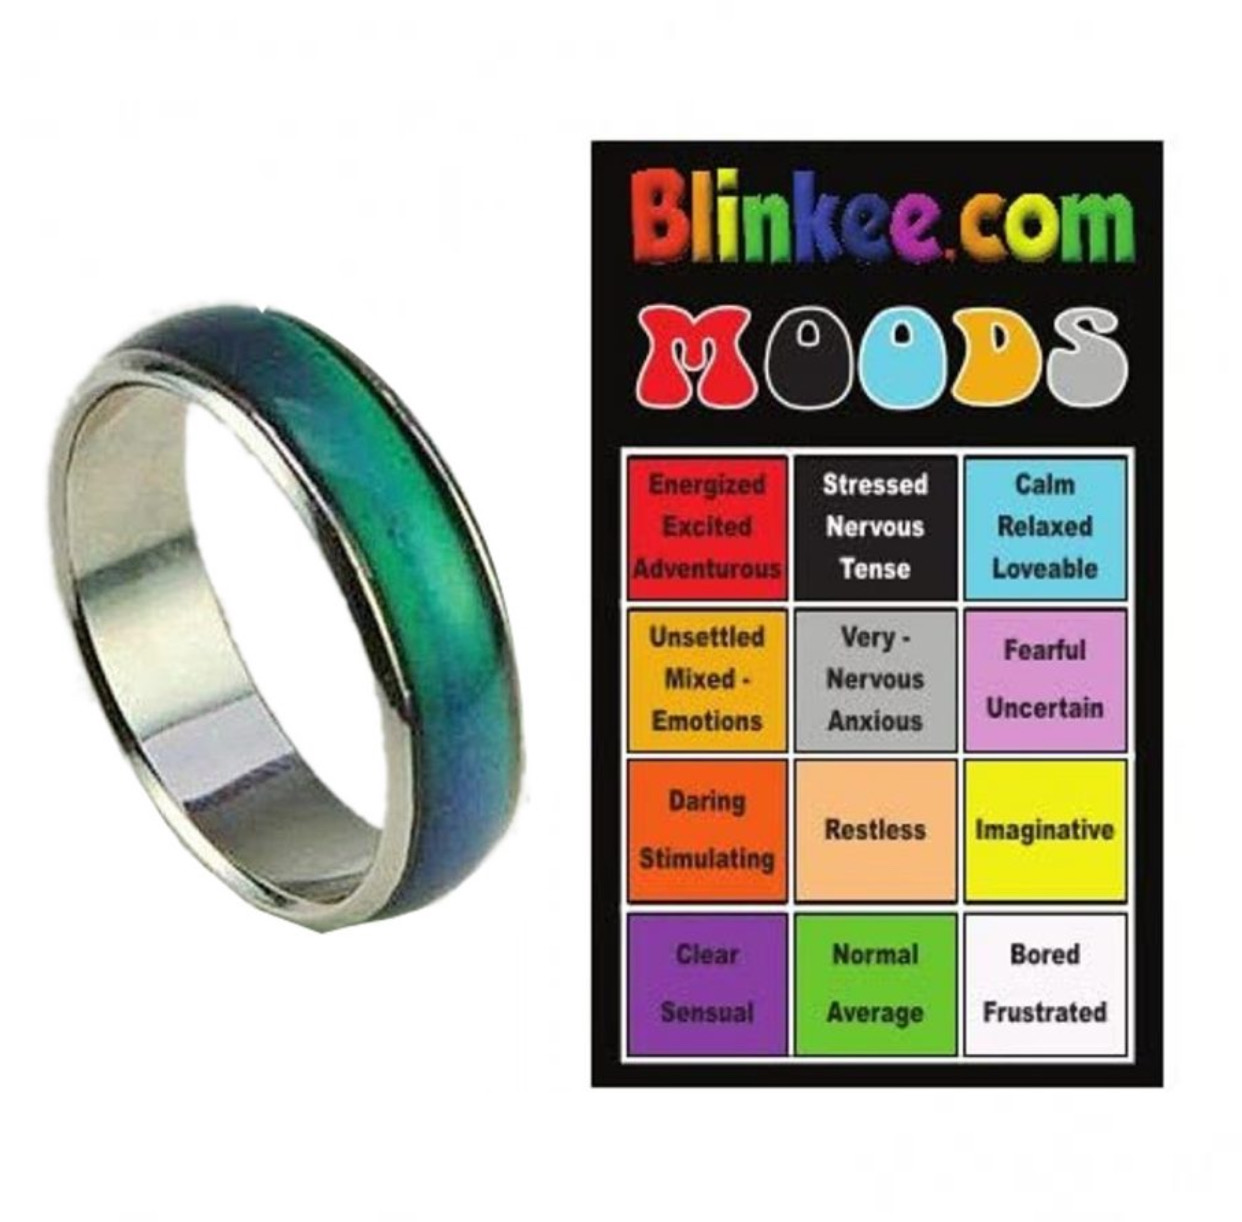 kevin woods - kevin woods mood ring color chart mood ring colors mood ...